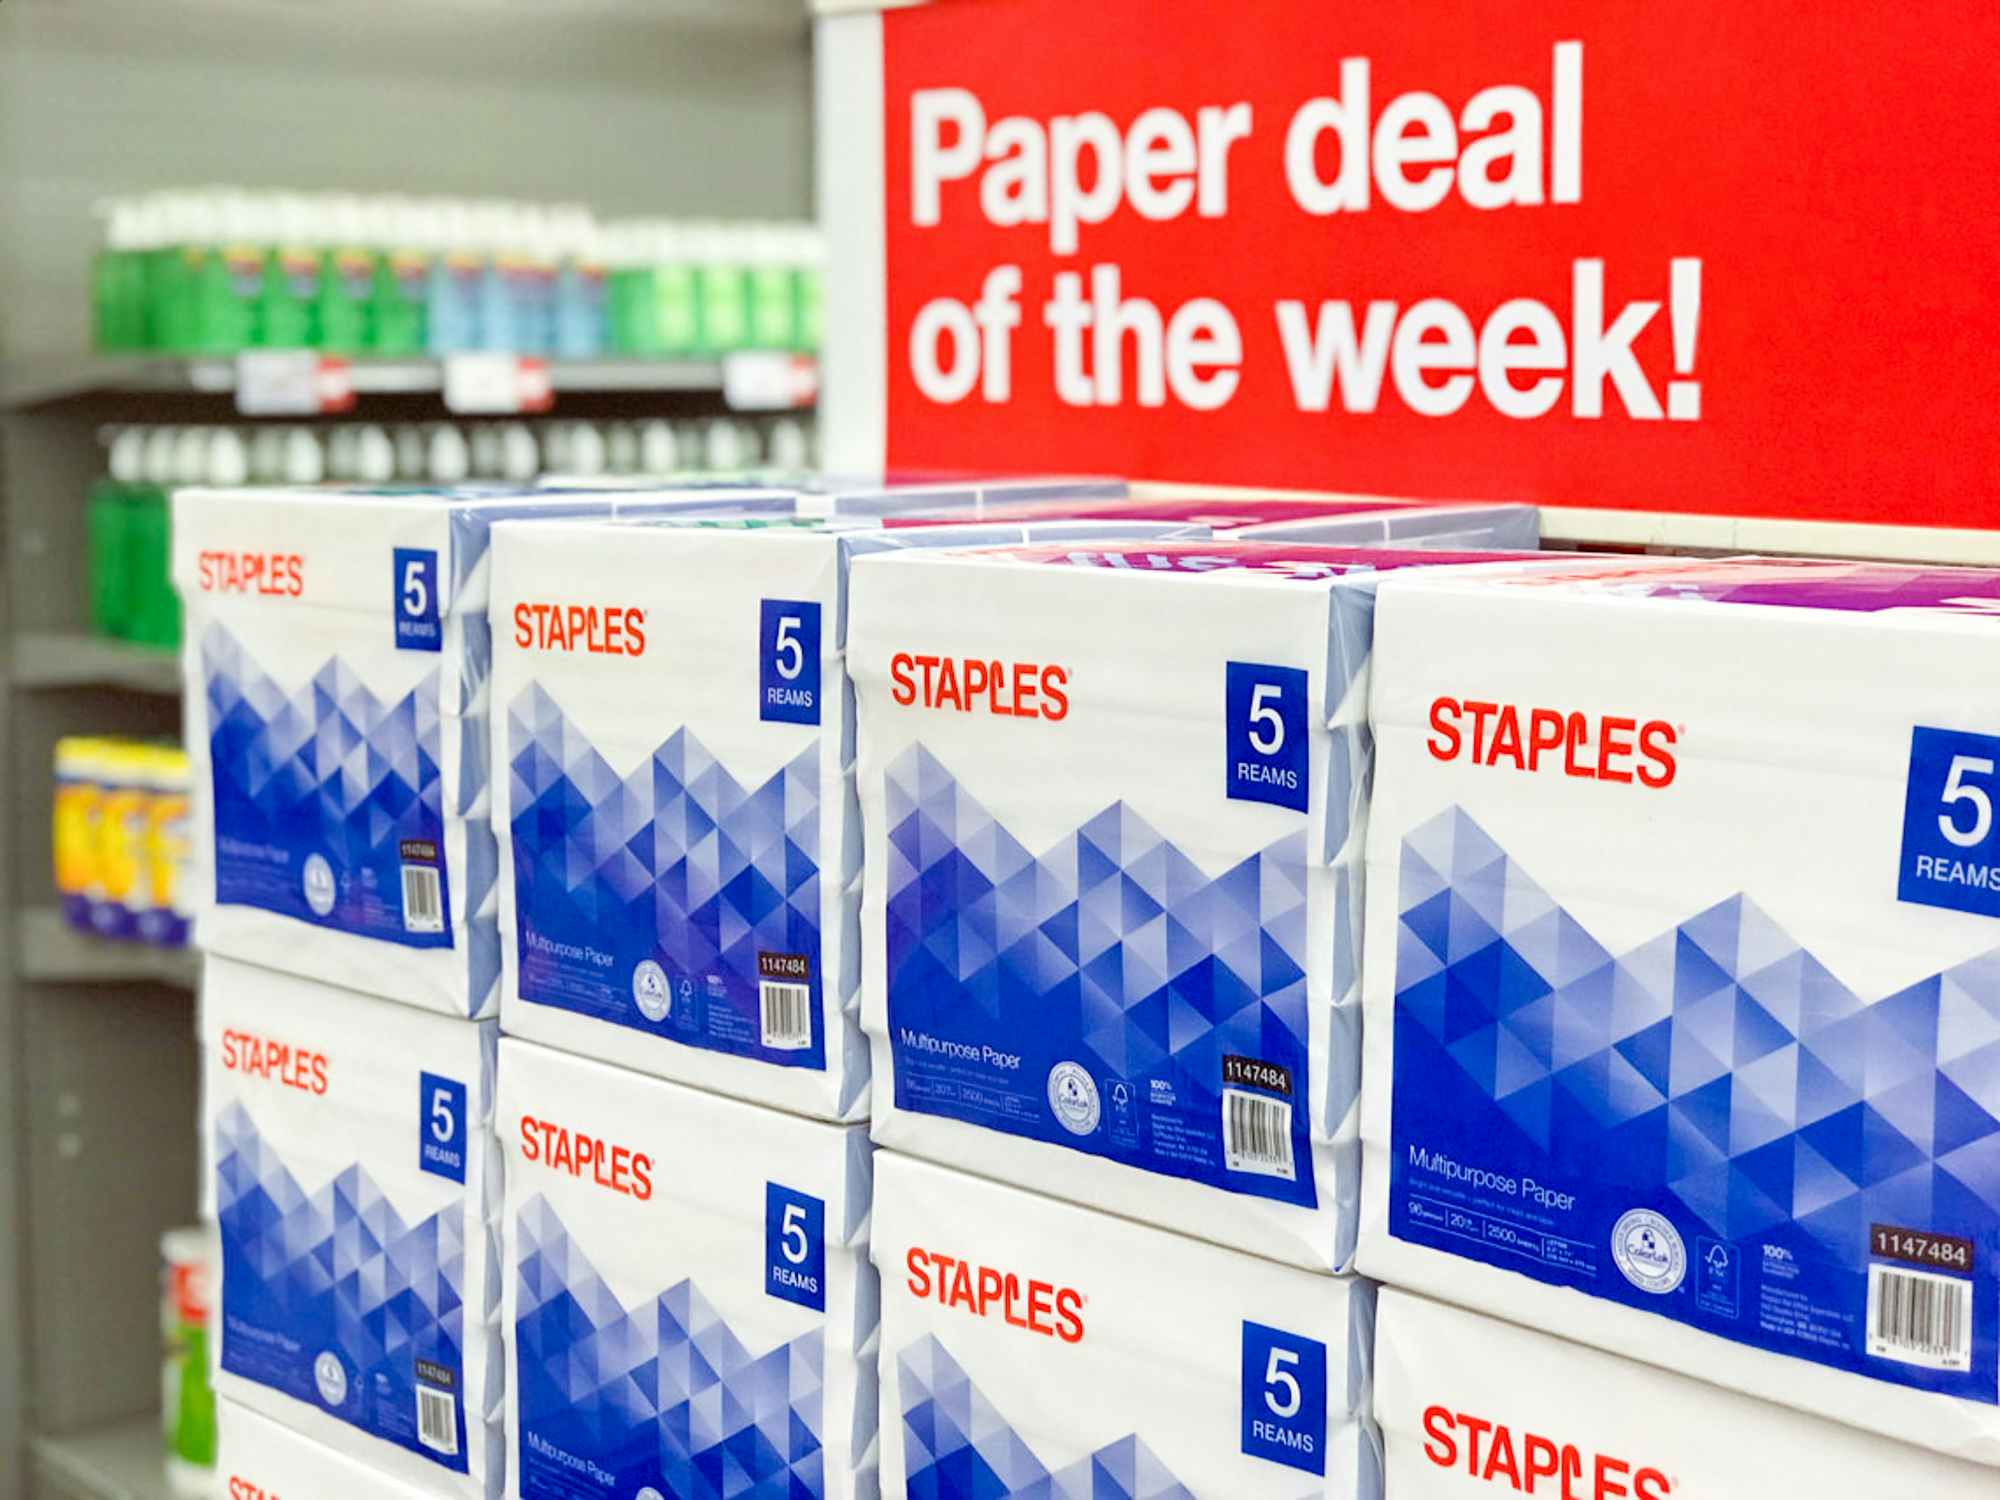 Reams of paper stocked at Staples with a sign that reads "Paper deal of the week